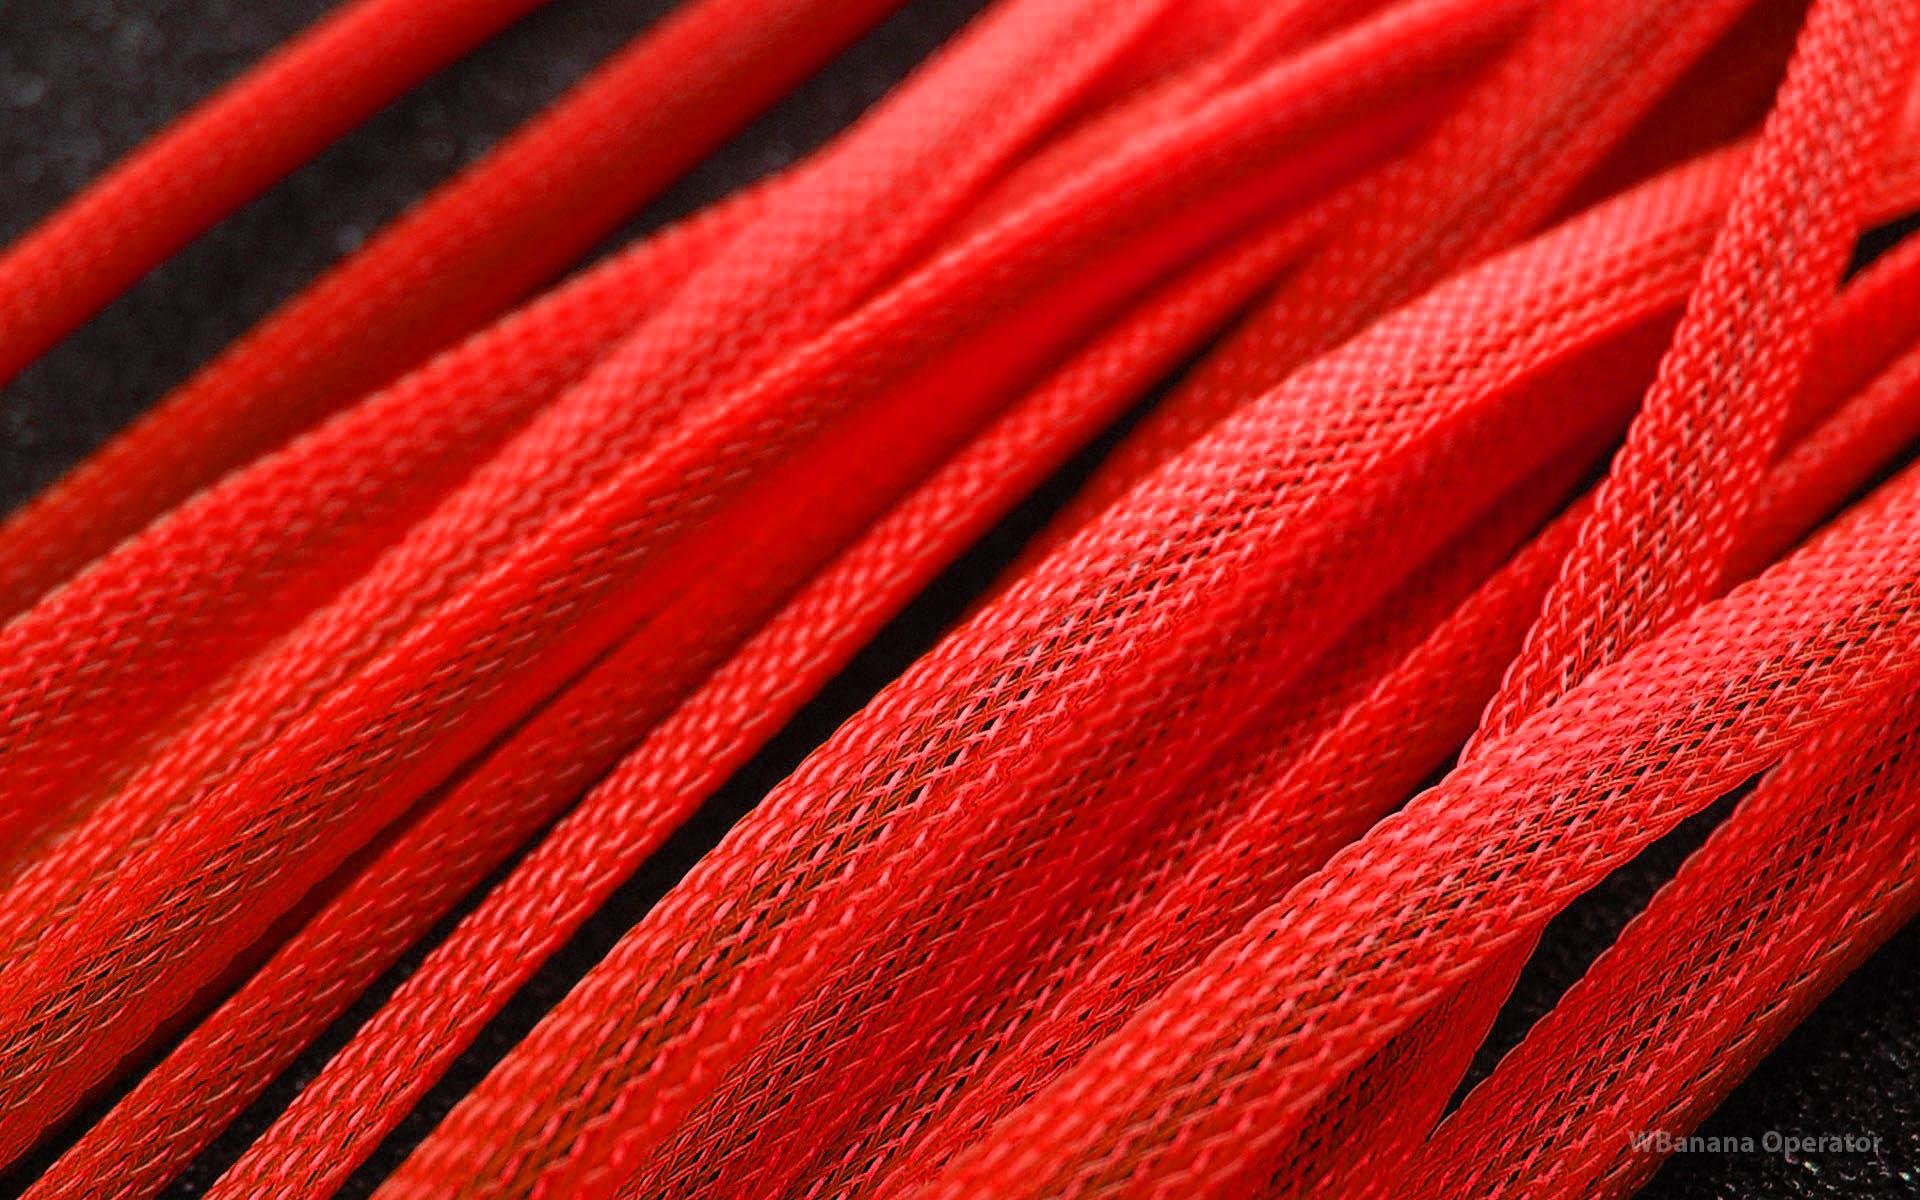 Cable_Mod_Wallpaper_02 Red.JPG